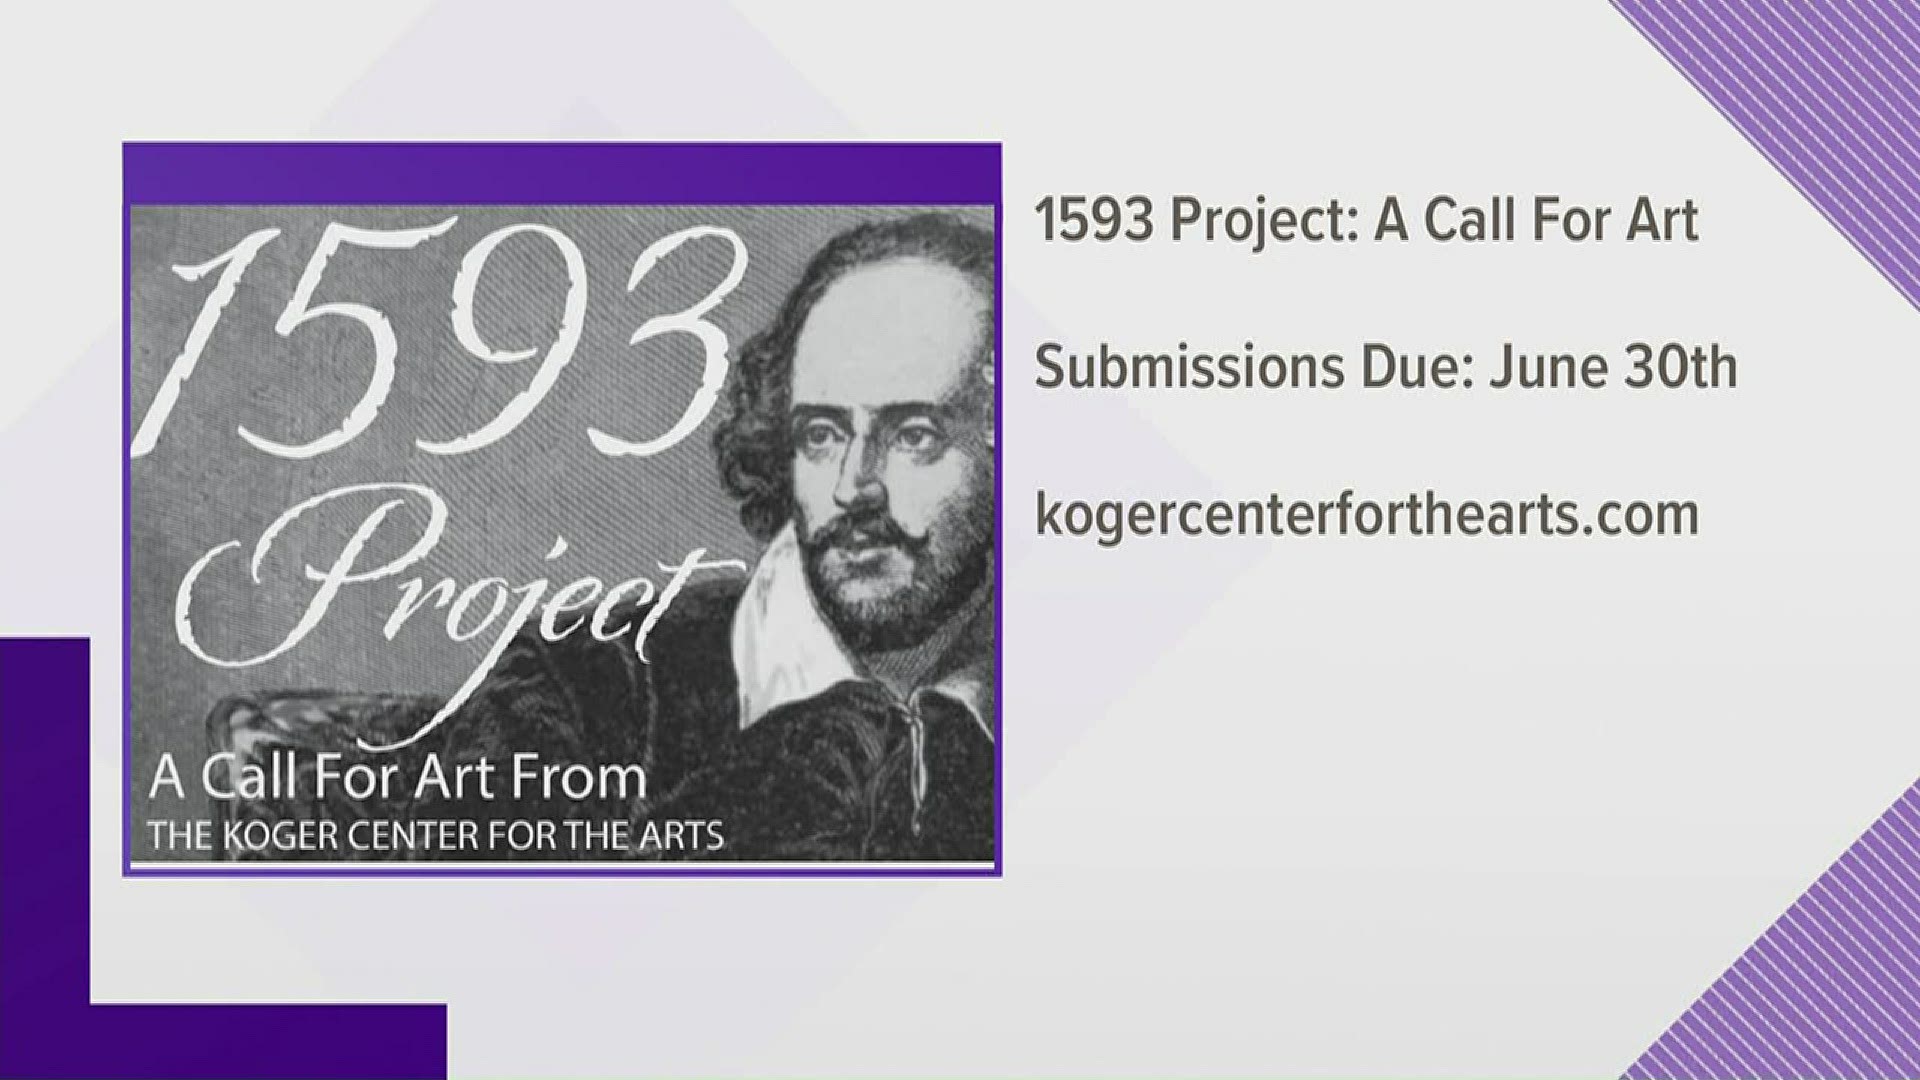 The Koger center is looking to support artists will a call for art, that will offer work space and $500 for an artist